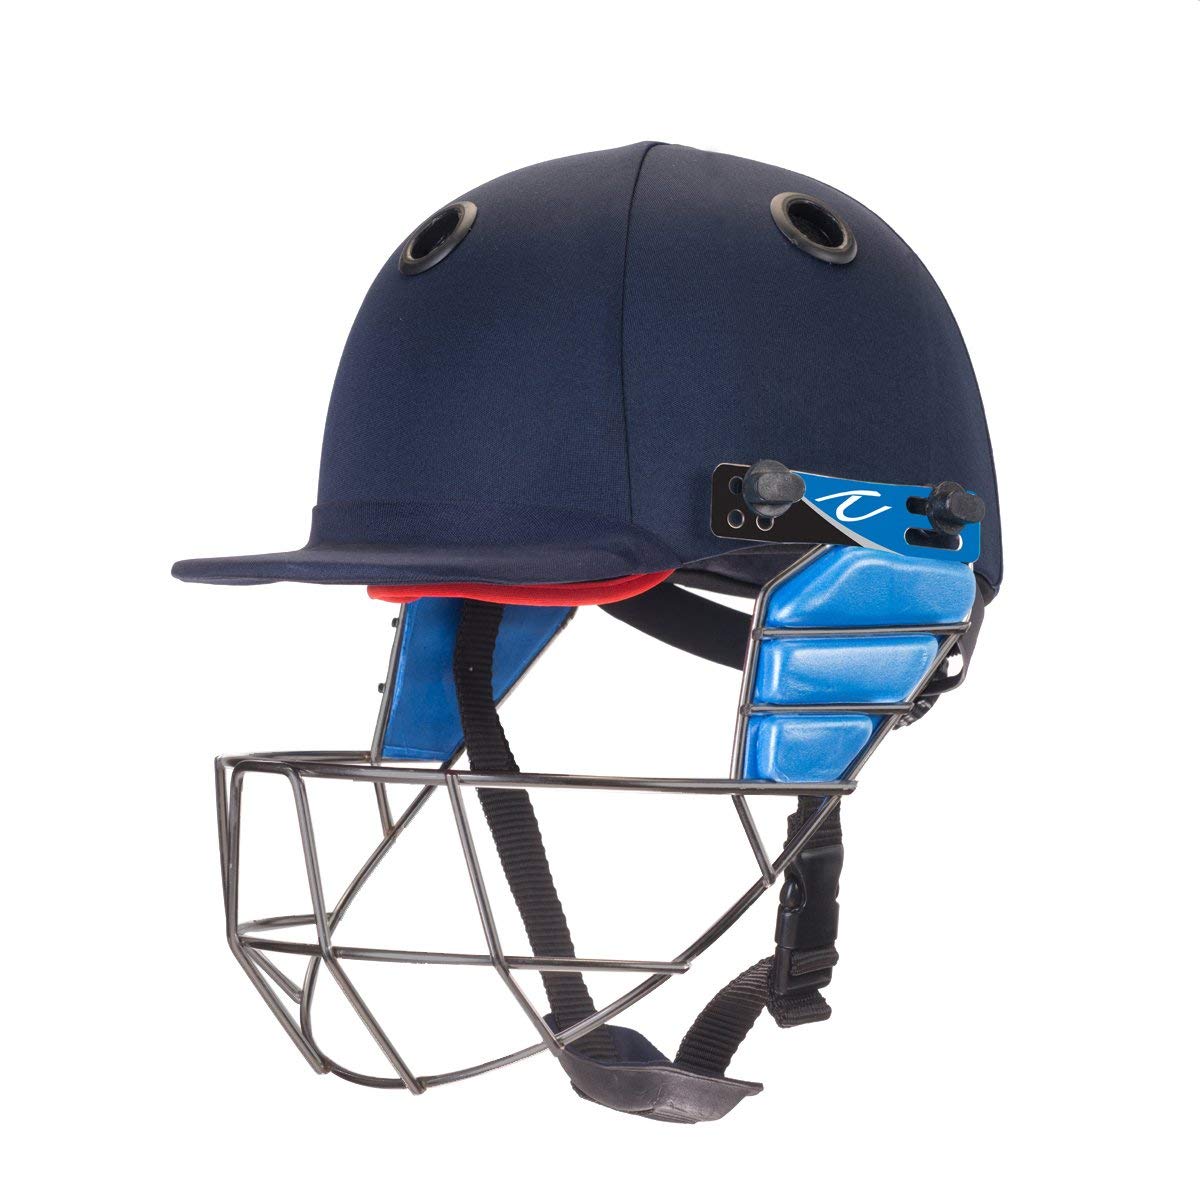 Forma Test Plus Adult Cricket Helmet with Stainless Steel Grill